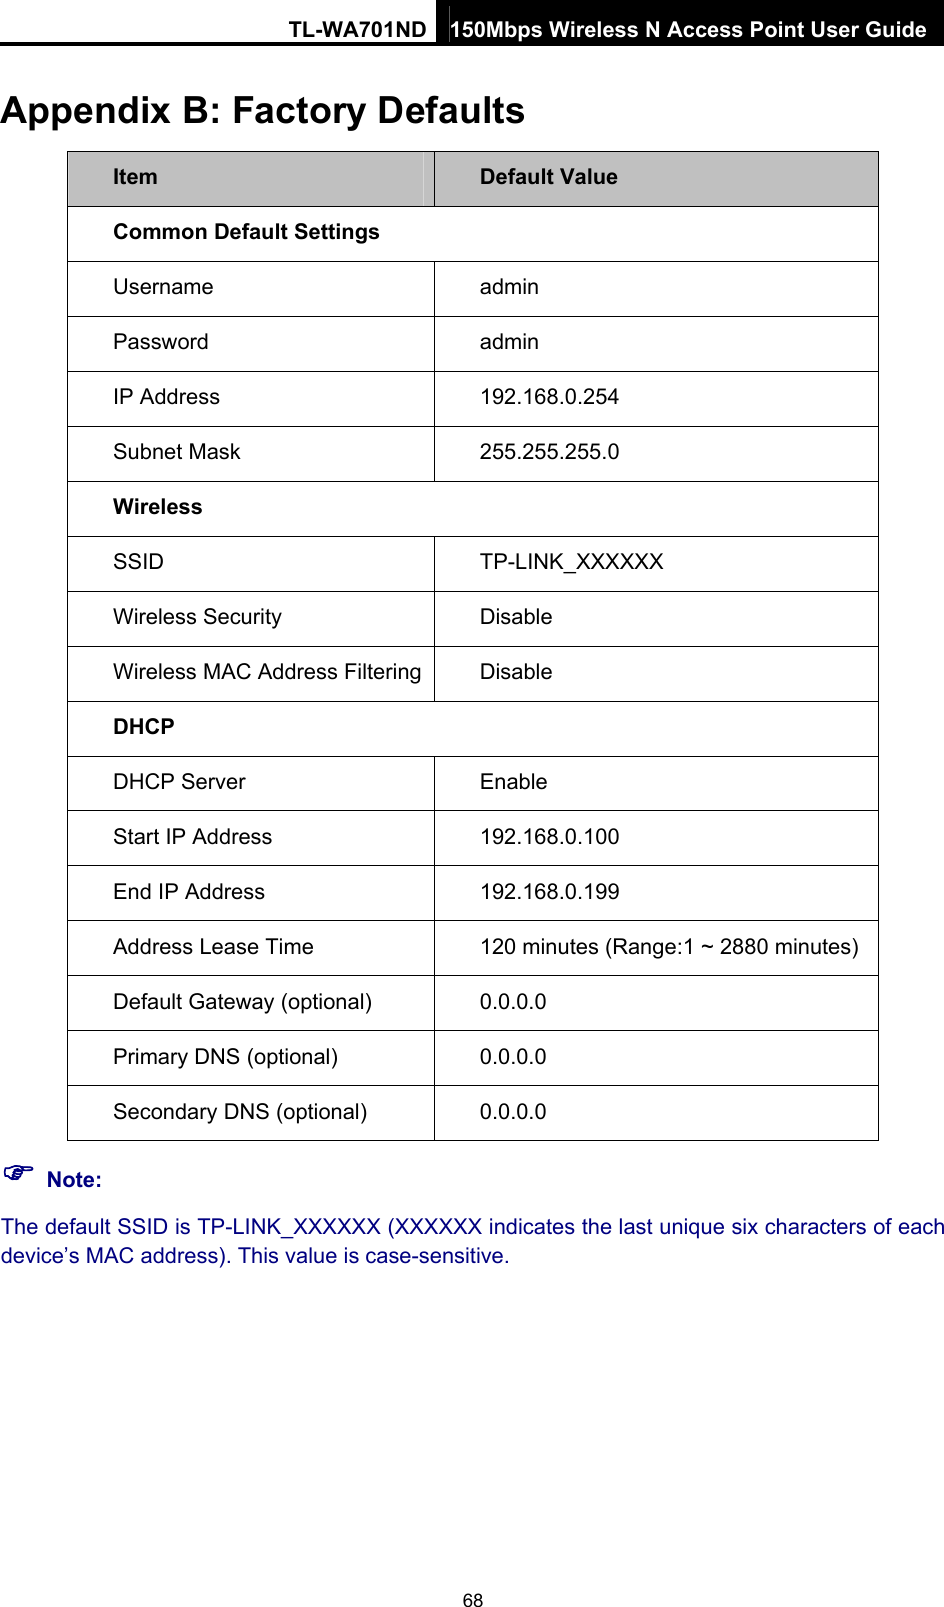 TL-WA701ND 150Mbps Wireless N Access Point User Guide Appendix B: Factory Defaults Item  Default Value Common Default Settings Username   admin Password  admin IP Address  192.168.0.254 Subnet Mask    255.255.255.0 Wireless SSID  TP-LINK_XXXXXX Wireless Security  Disable Wireless MAC Address Filtering  Disable DHCP DHCP Server  Enable Start IP Address  192.168.0.100 End IP Address  192.168.0.199 Address Lease Time  120 minutes (Range:1 ~ 2880 minutes) Default Gateway (optional)    0.0.0.0 Primary DNS (optional)  0.0.0.0 Secondary DNS (optional)    0.0.0.0 ) Note: The default SSID is TP-LINK_XXXXXX (XXXXXX indicates the last unique six characters of each device’s MAC address). This value is case-sensitive. 68 